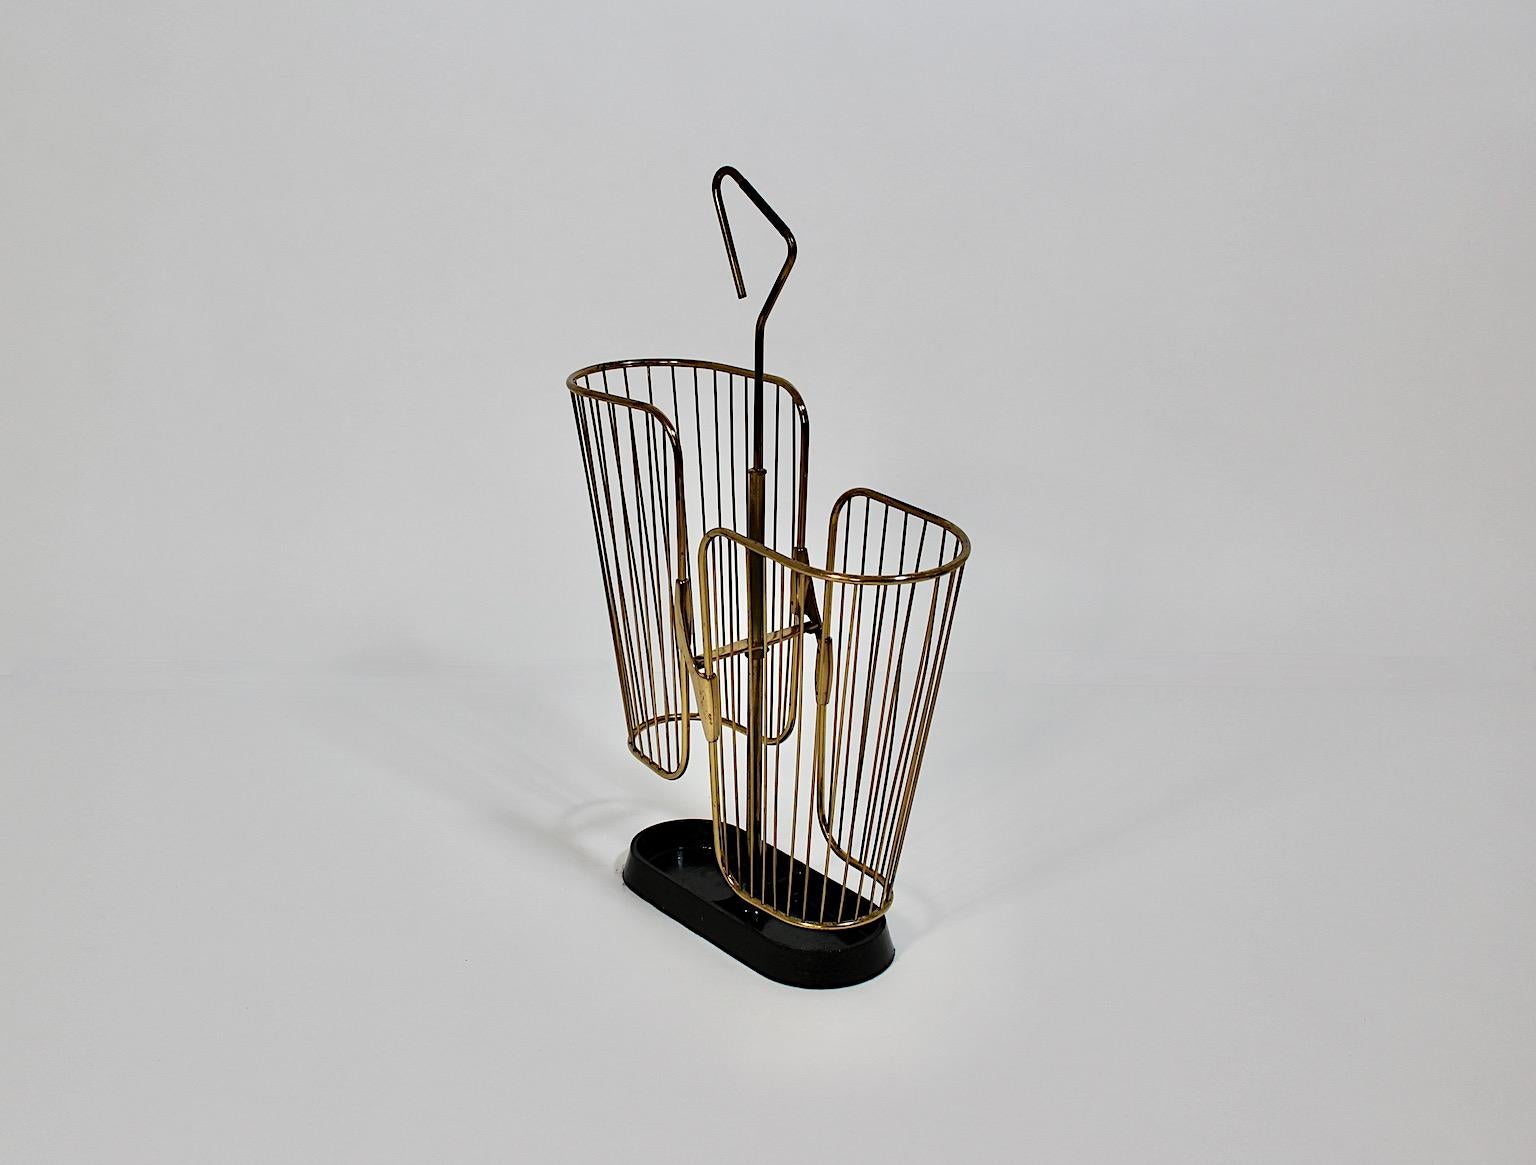 Modernist Mid Century Modern Vintage umbrella stand from brass, aluminum and black lacquered metal 1950s Germany.
A beautiful vintage umbrella stand showing a brass cage and black lacquered metal base.
This umbrella stand features a brass cage body